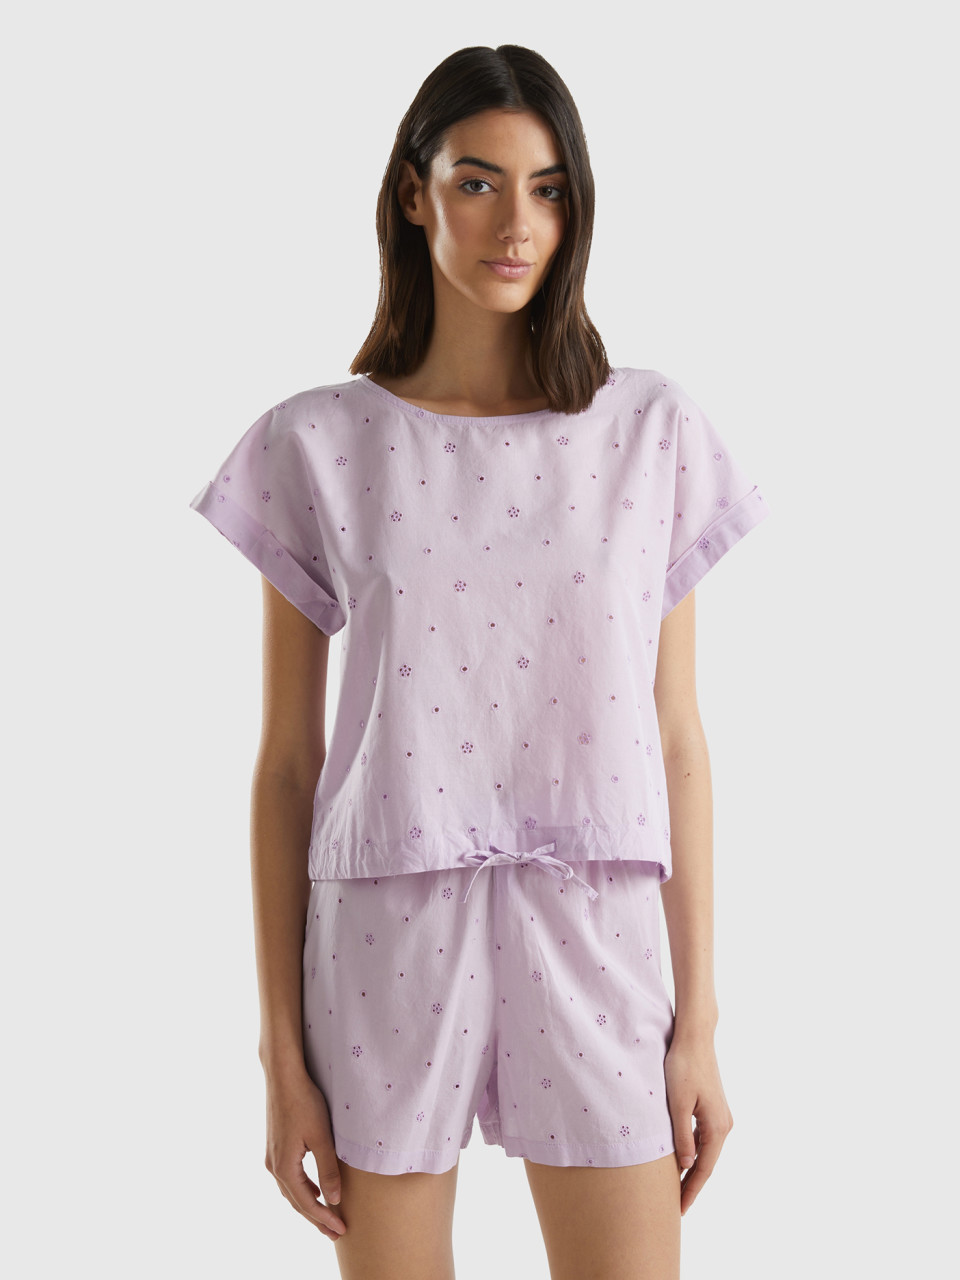 Benetton, Top With Broderie Anglaise, Lilac, Women